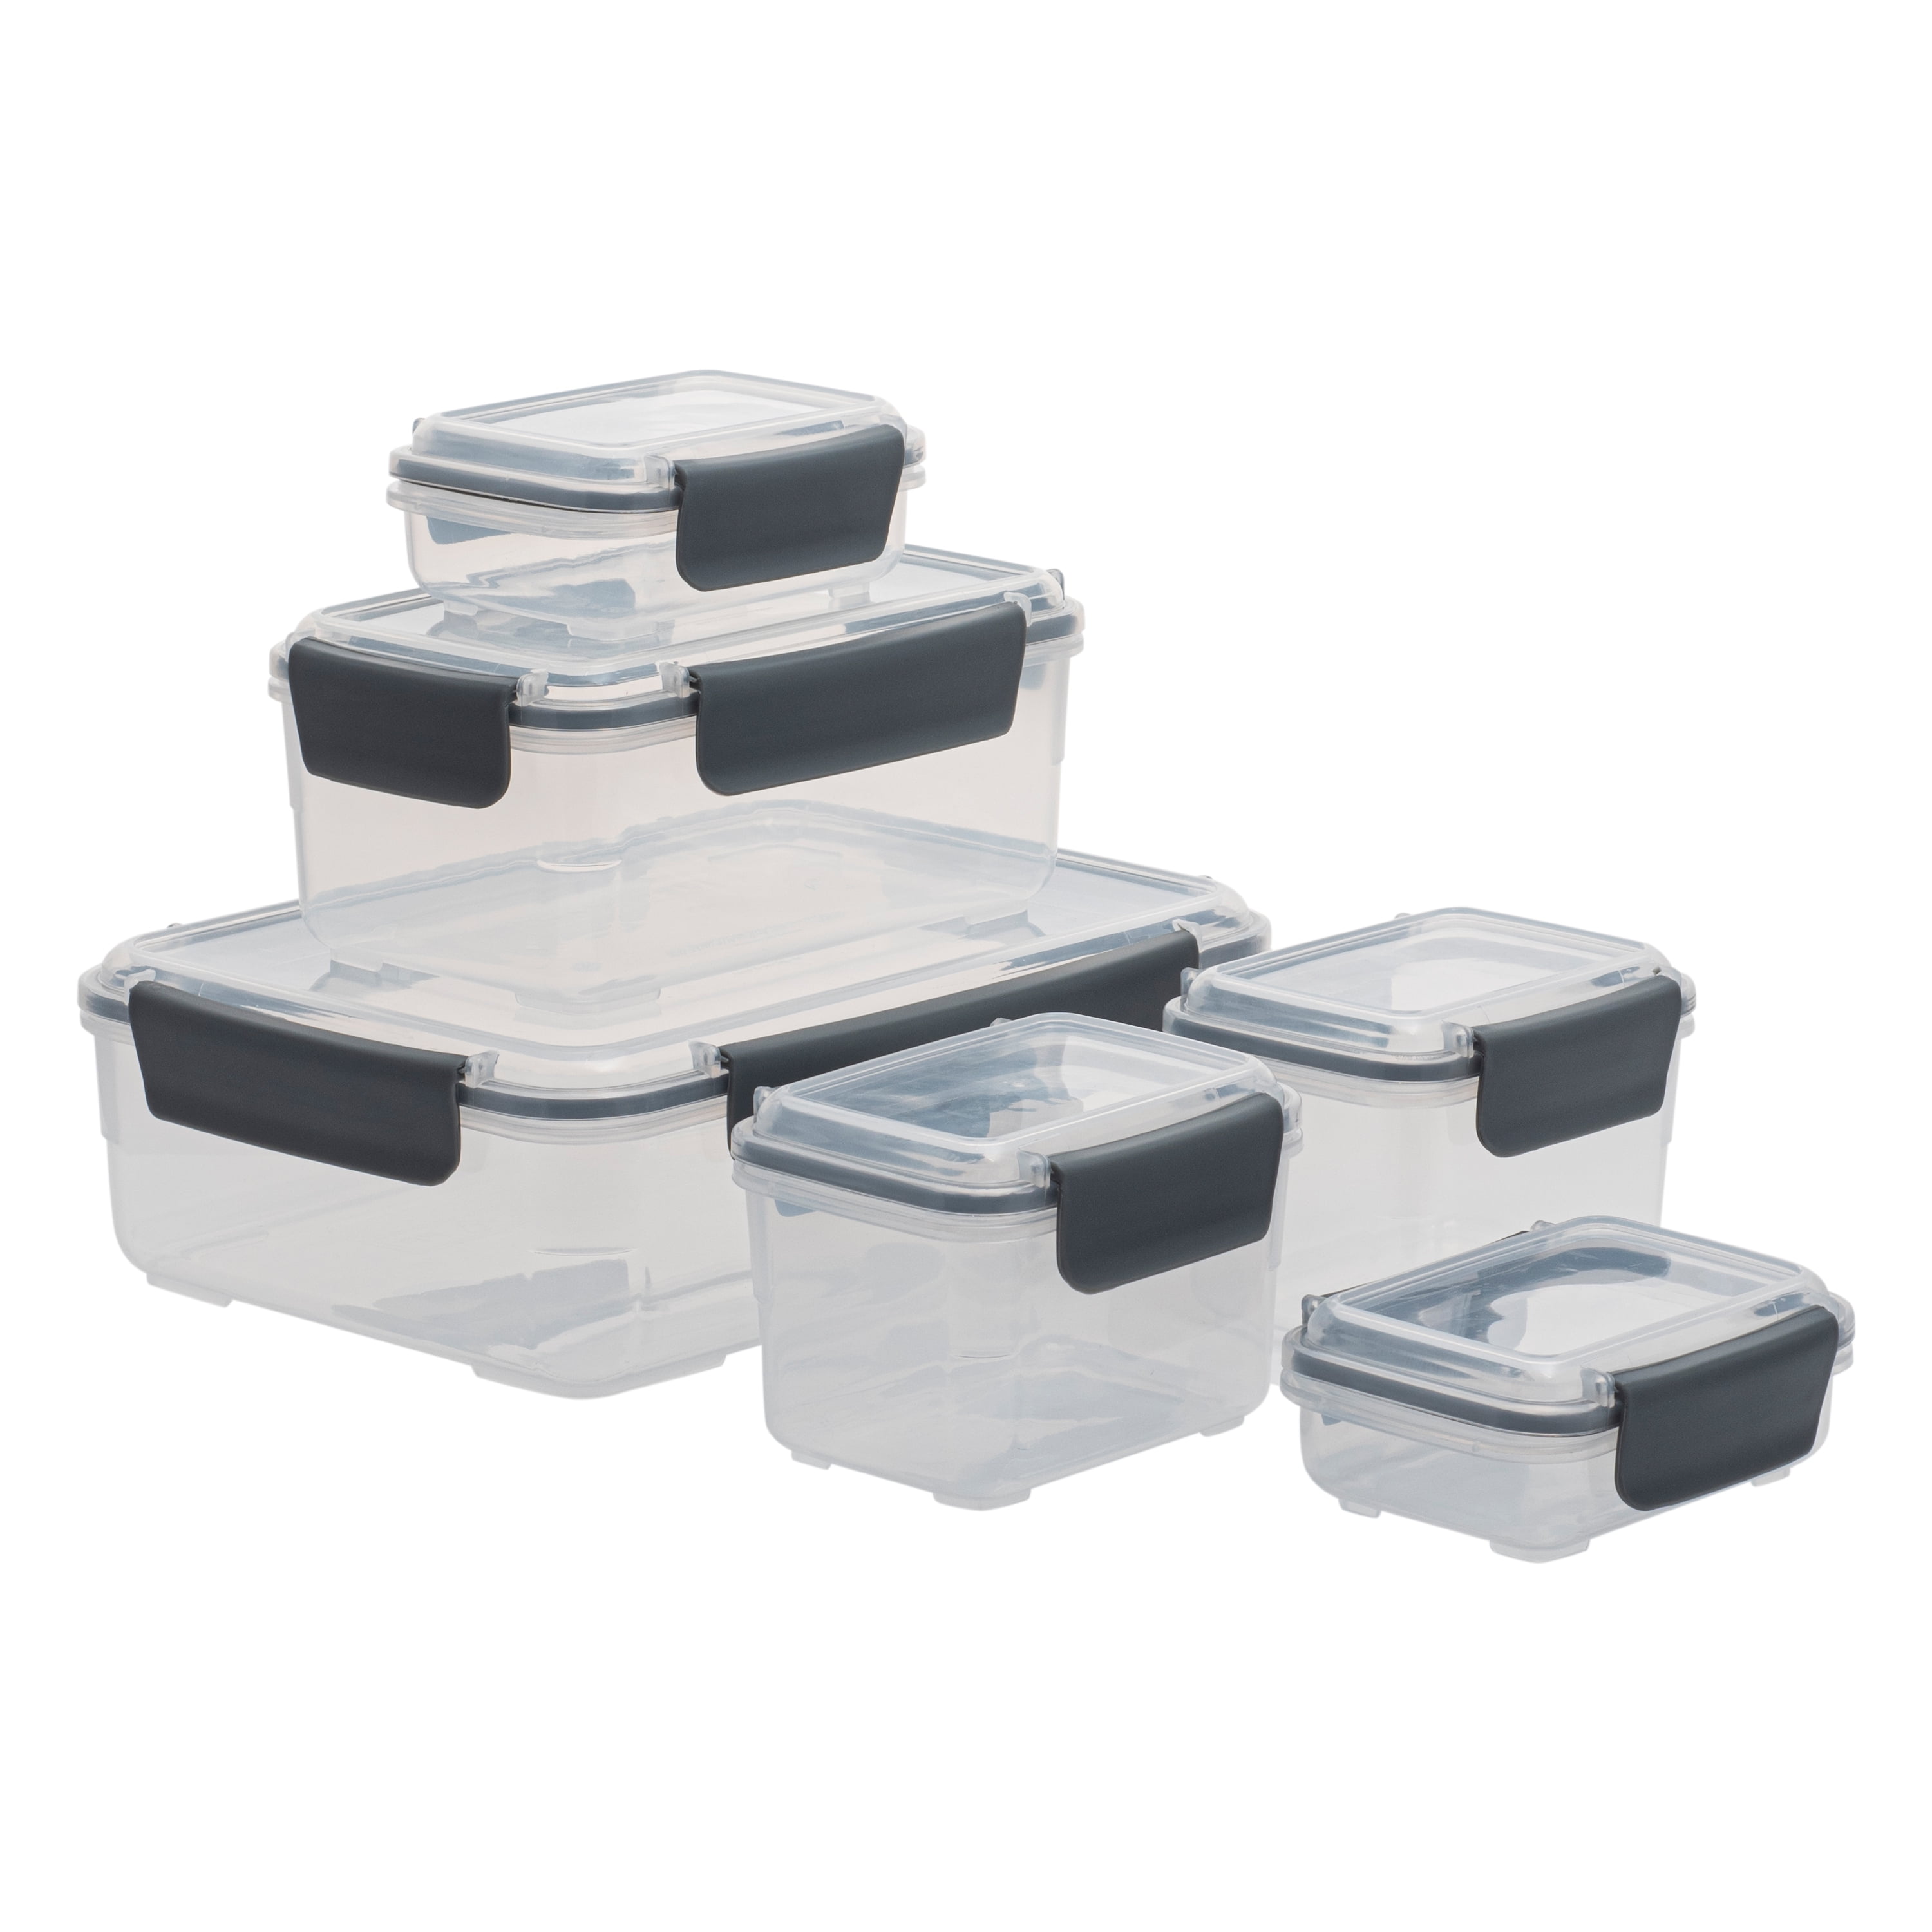  FineDine Airtight Food Storage Container Sets for Kitchen  Pantry Organization and Storage - 12-Piece Set with Lids for Flour, Sugar,  Cereal, and More (Grey): Home & Kitchen